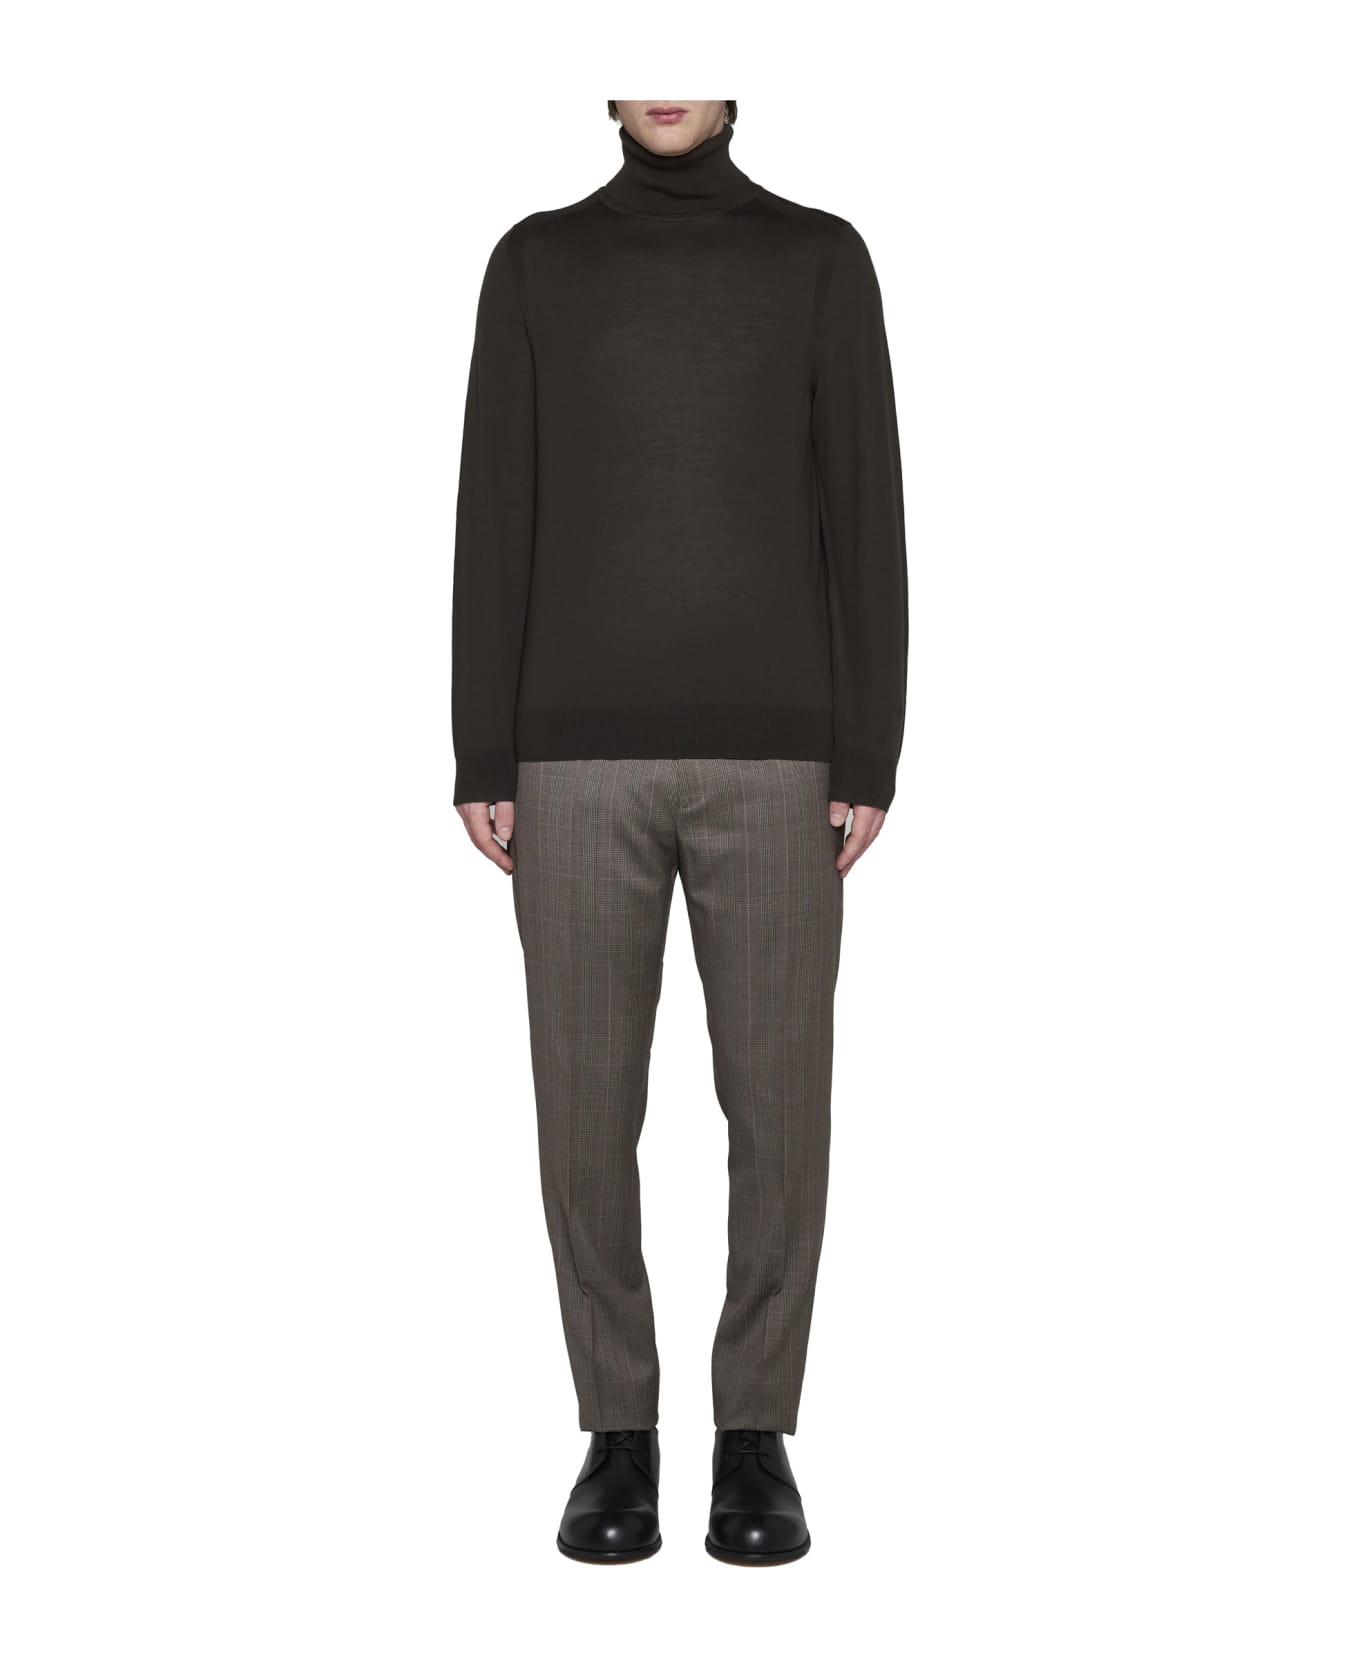 Paul Smith Sweater - Military green